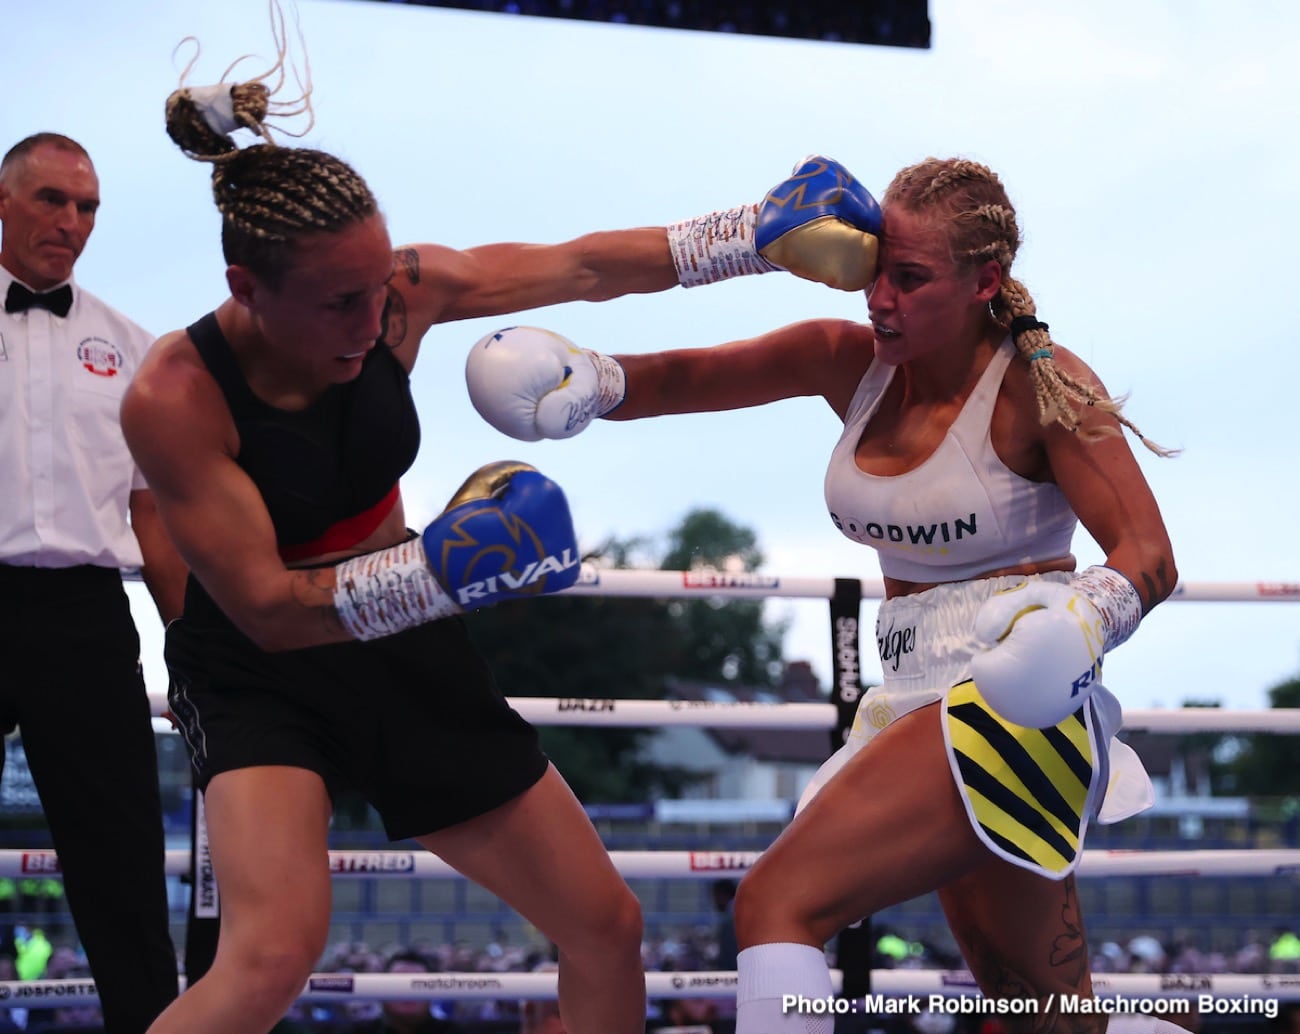 Image: Boxing Results: Lara - Warrington Rematch Ends in TD, Katie Taylor Wins!